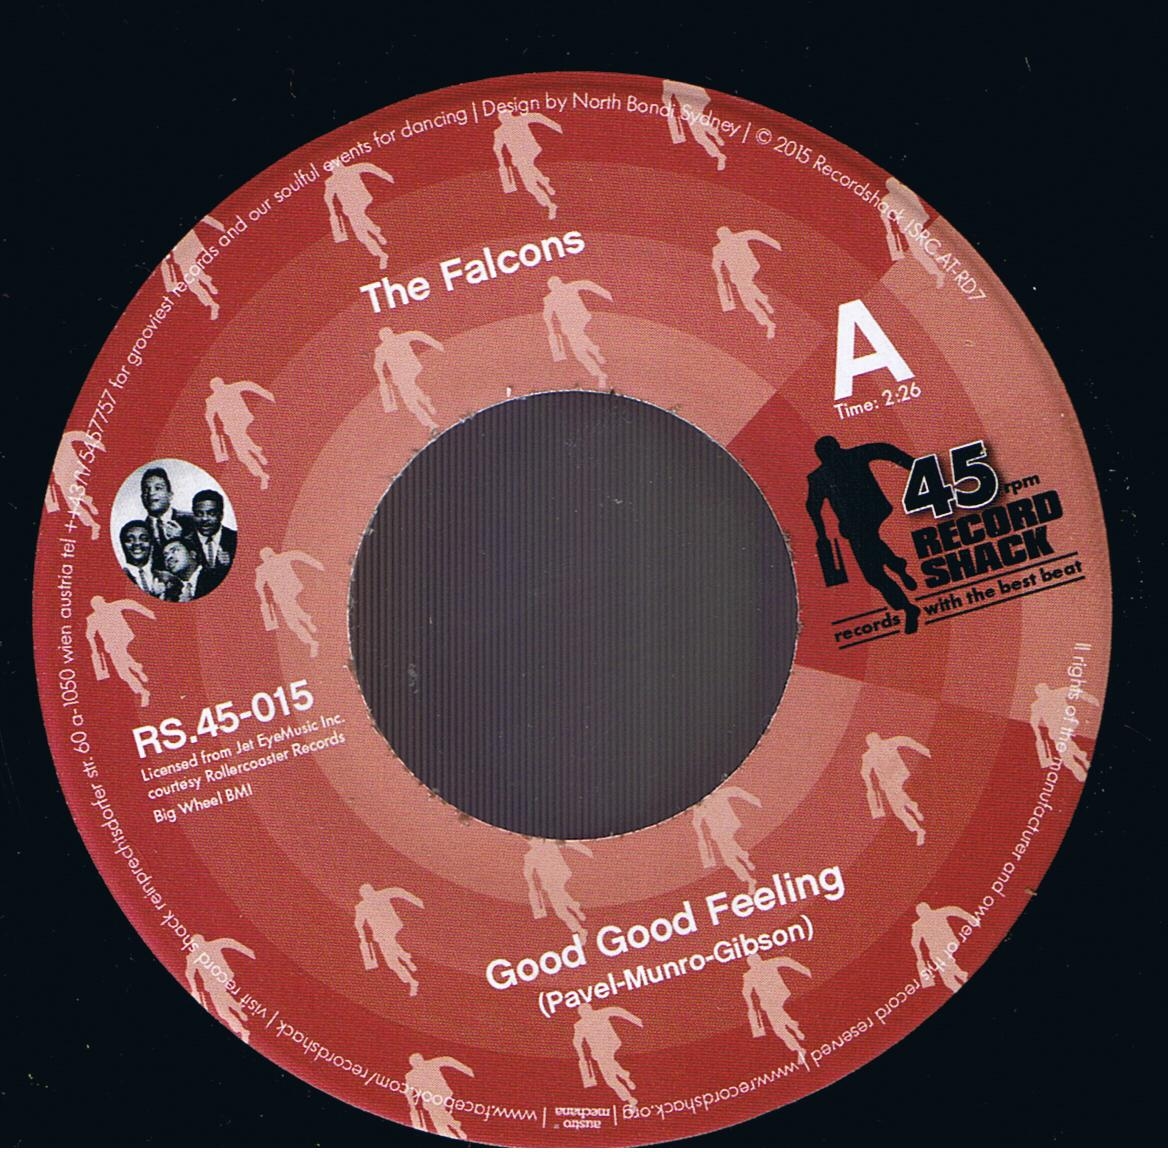 The Falcons - Good Good Feeling / The Falcons - Standing On Guard(Alternate Version) (7") 